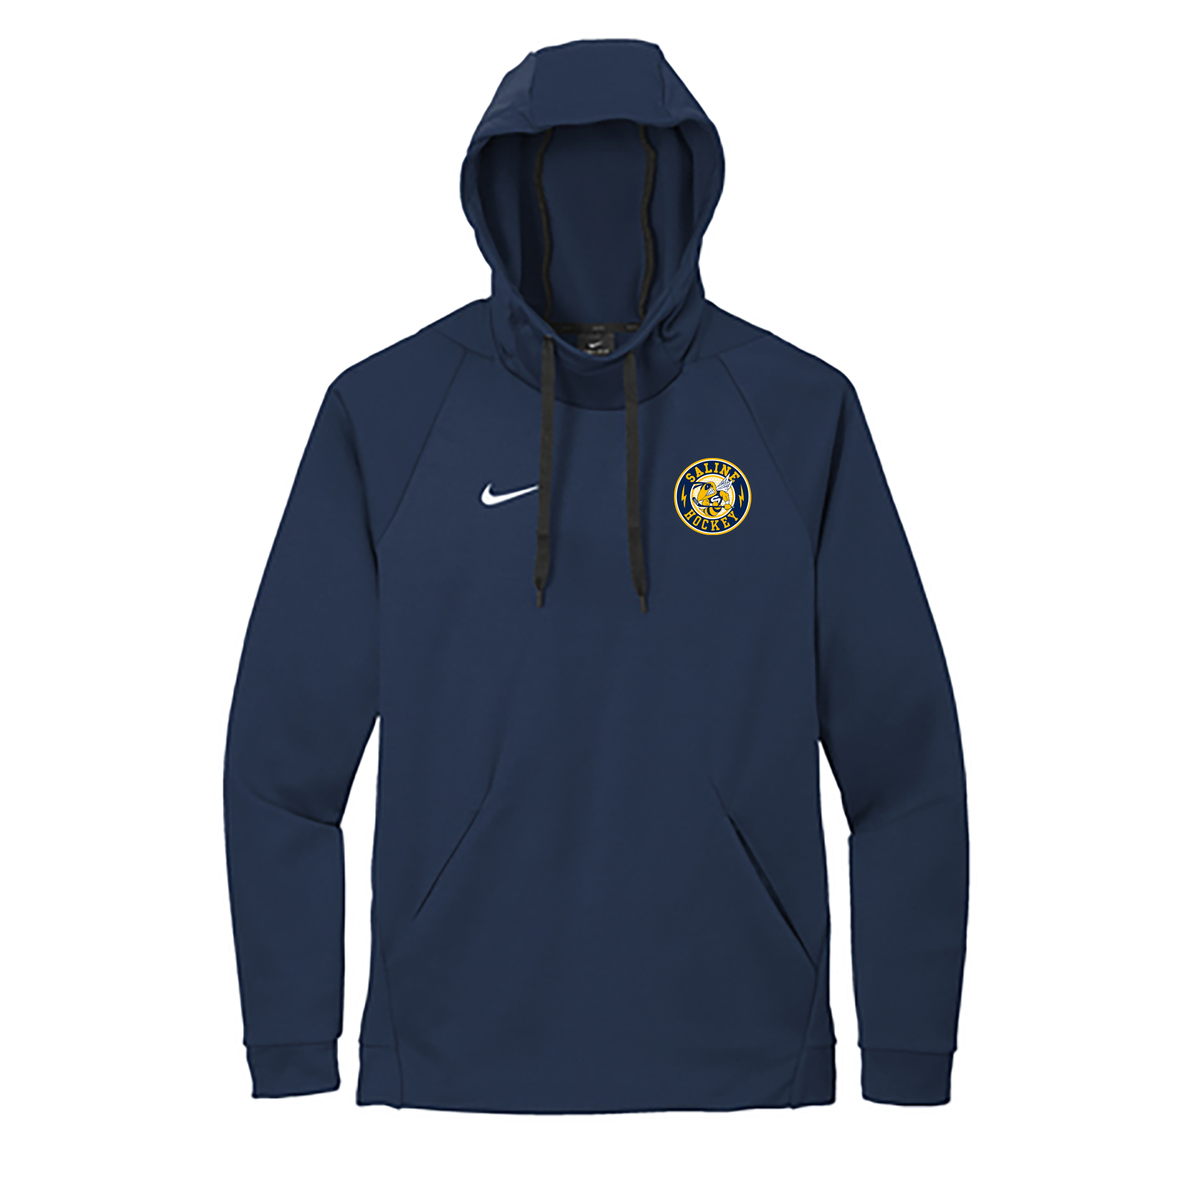 Saline Hornets Hockey Nike Therma-FIT Embroidered Hoodie